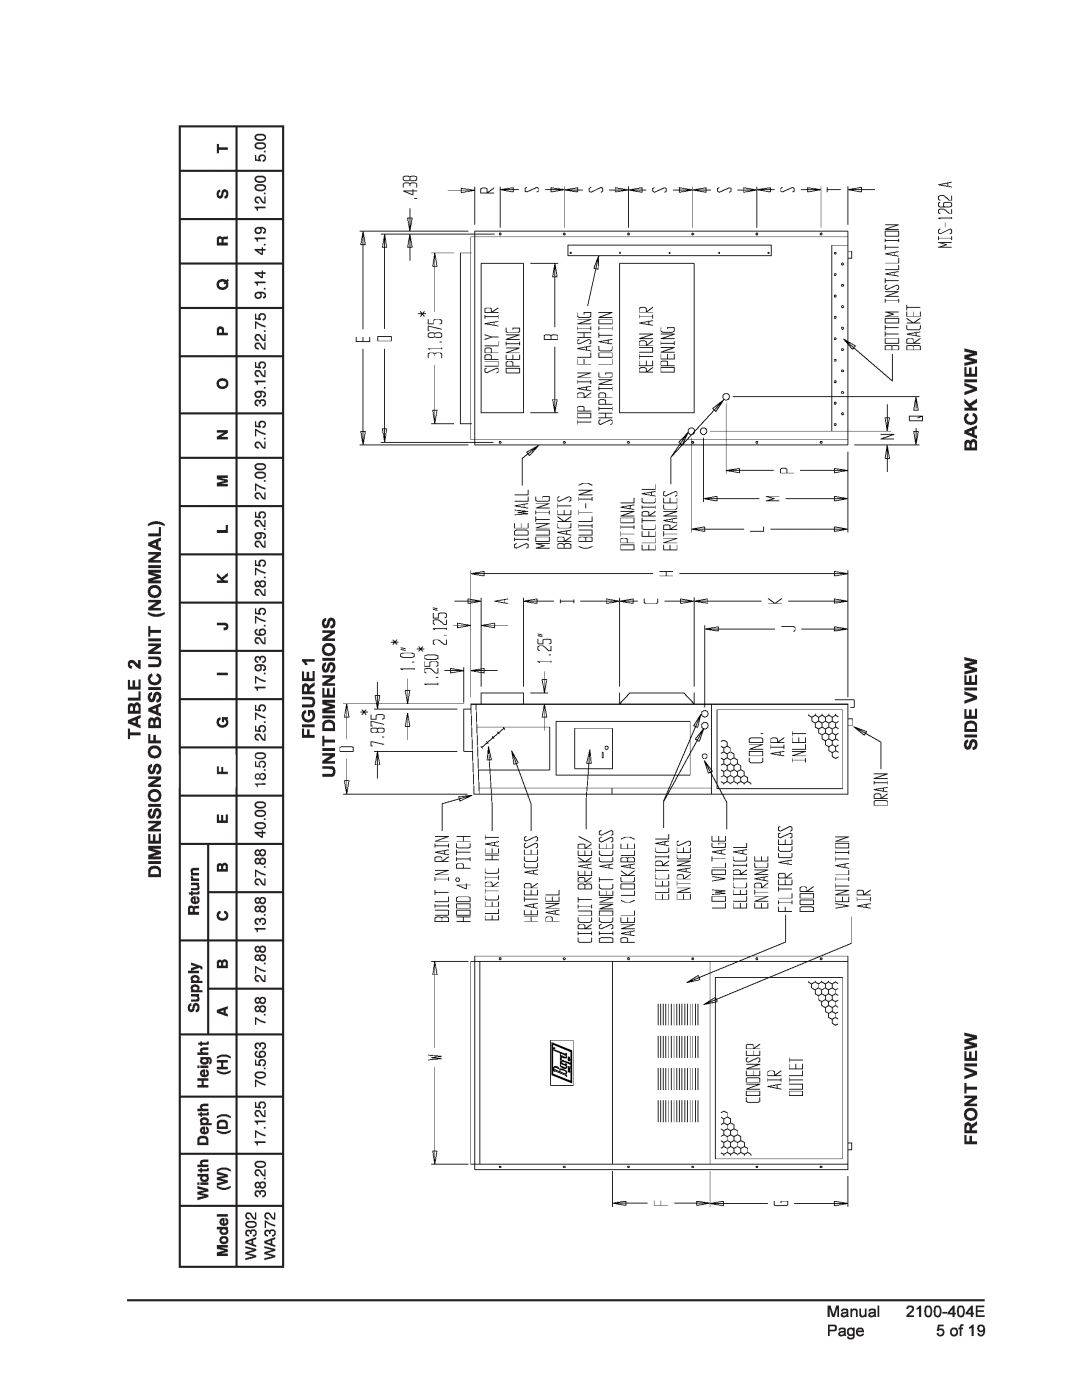 Bard 2100-404E Table Dimensions Of Basic Unit Nominal, Figure Unit Dimensions, Front View, Side View, Back View, Page 